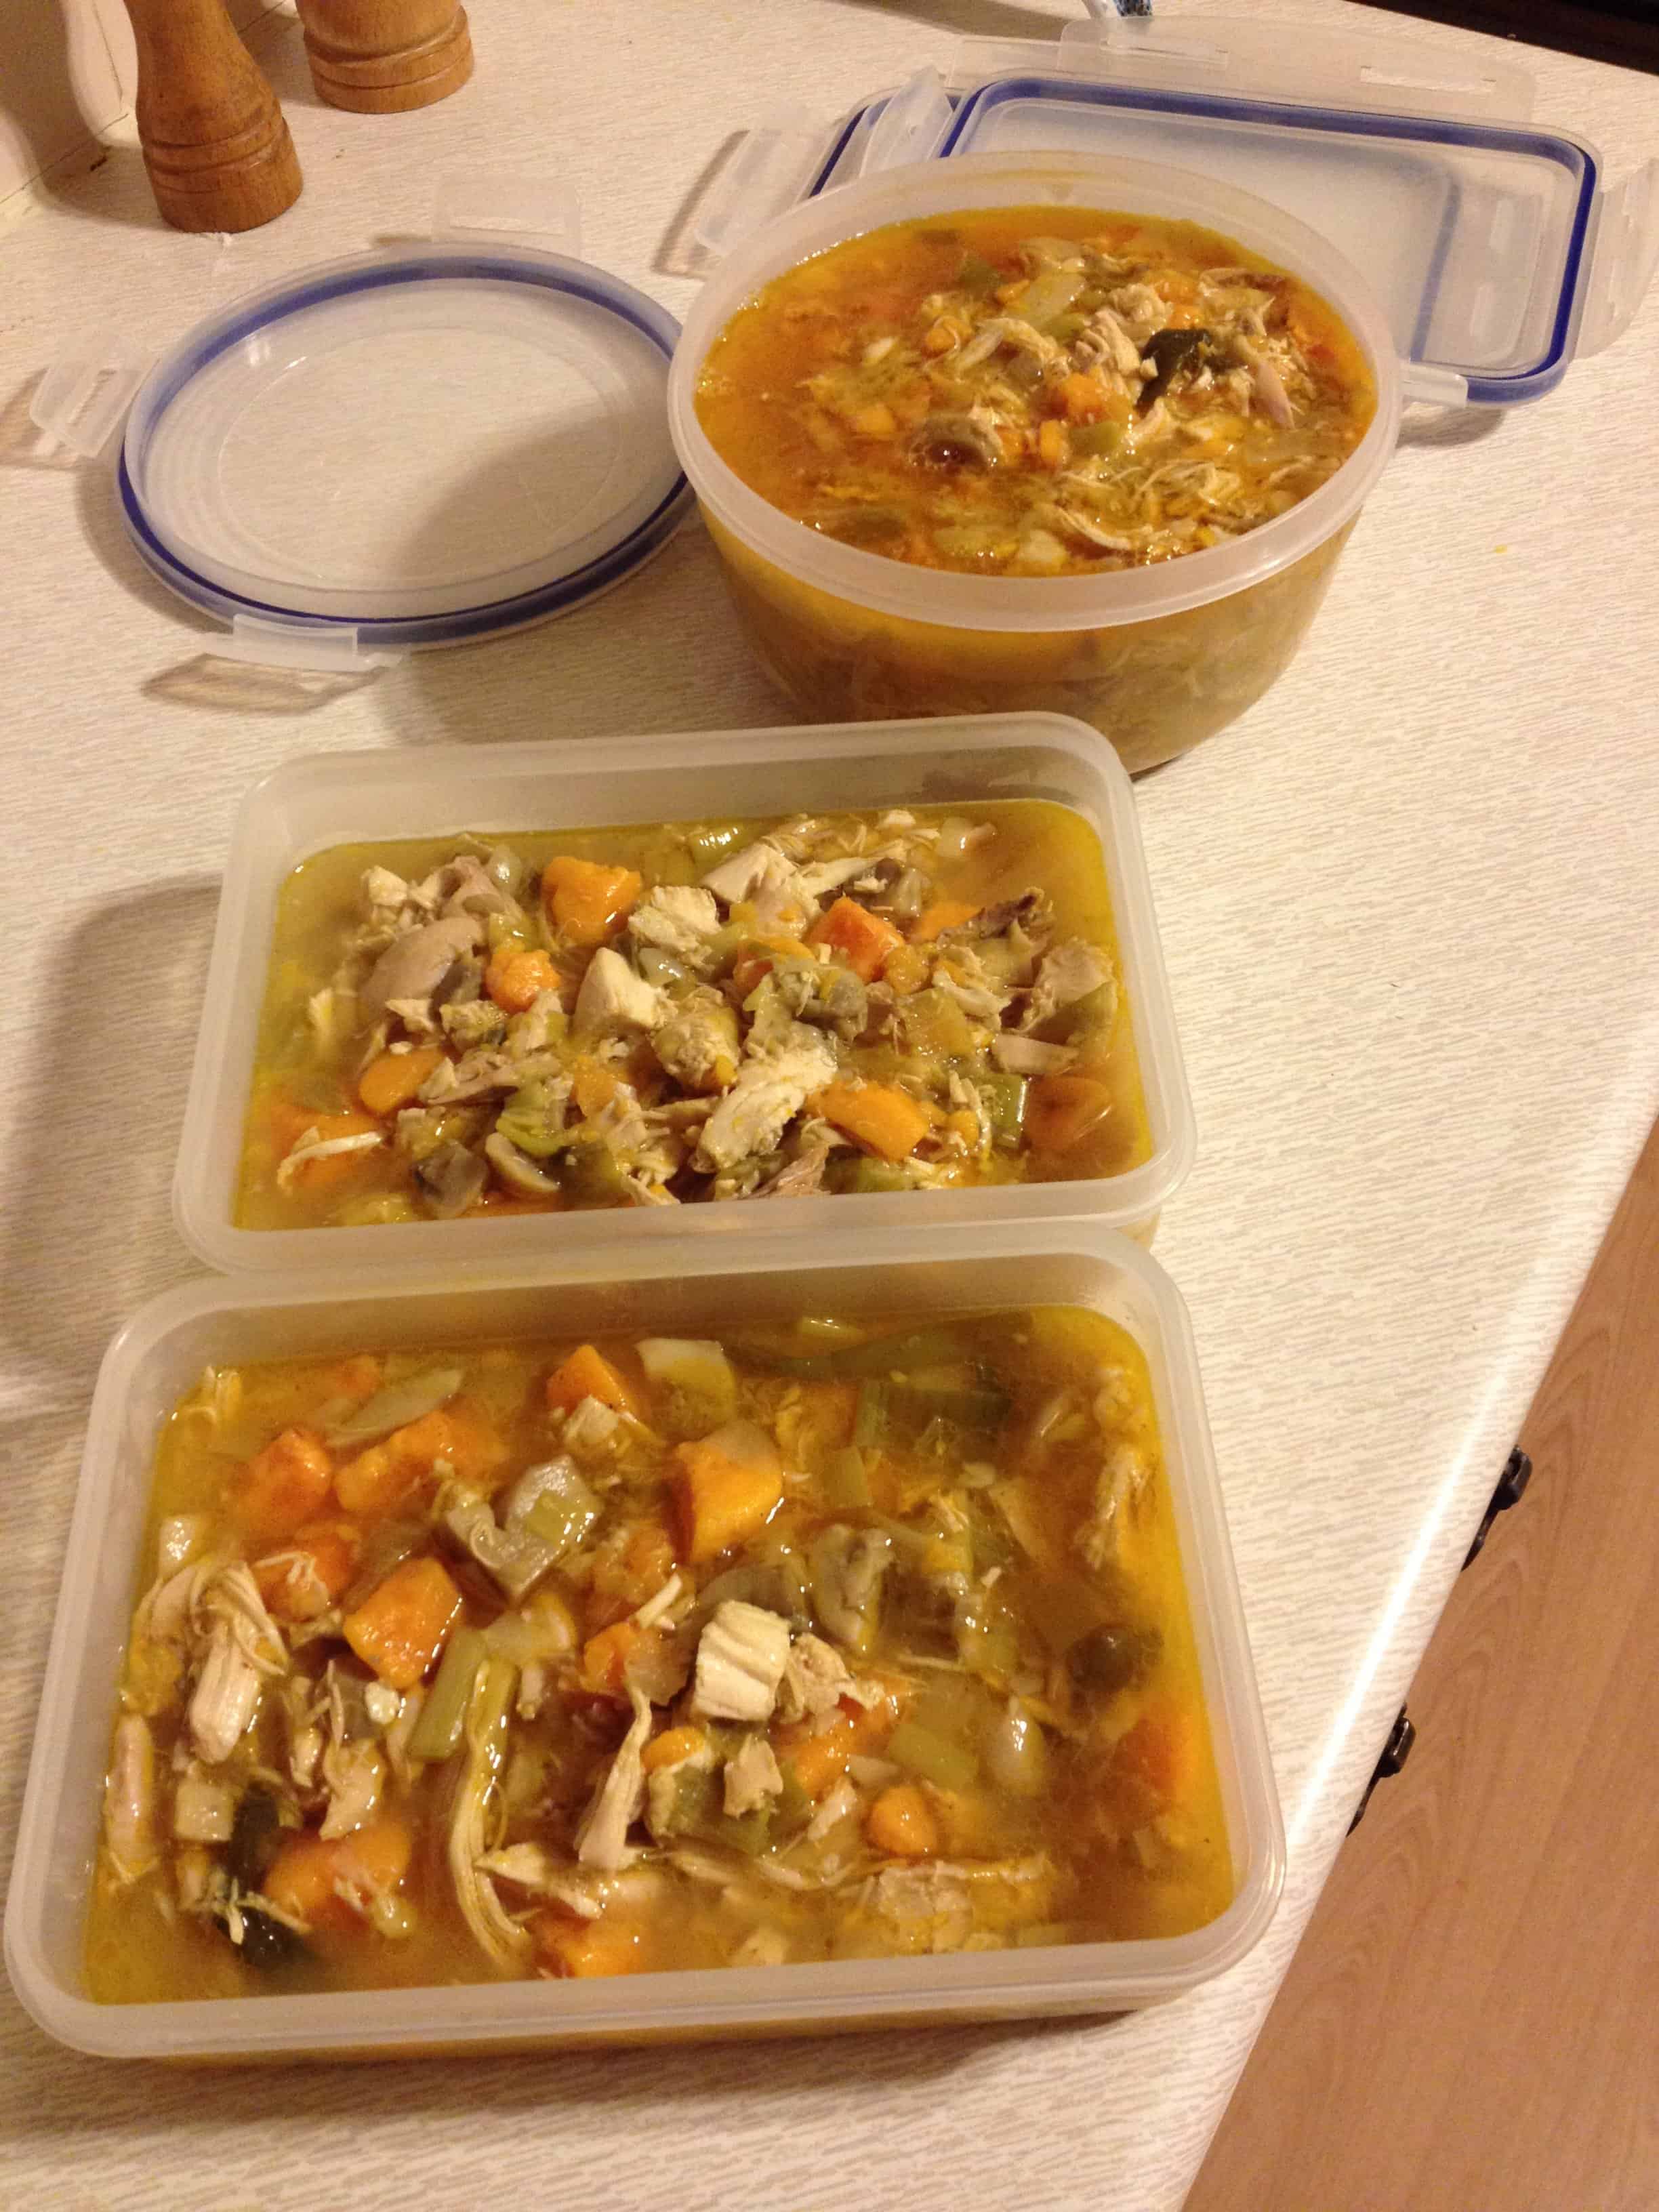 You can portion up the soup and freeze or fridge it!